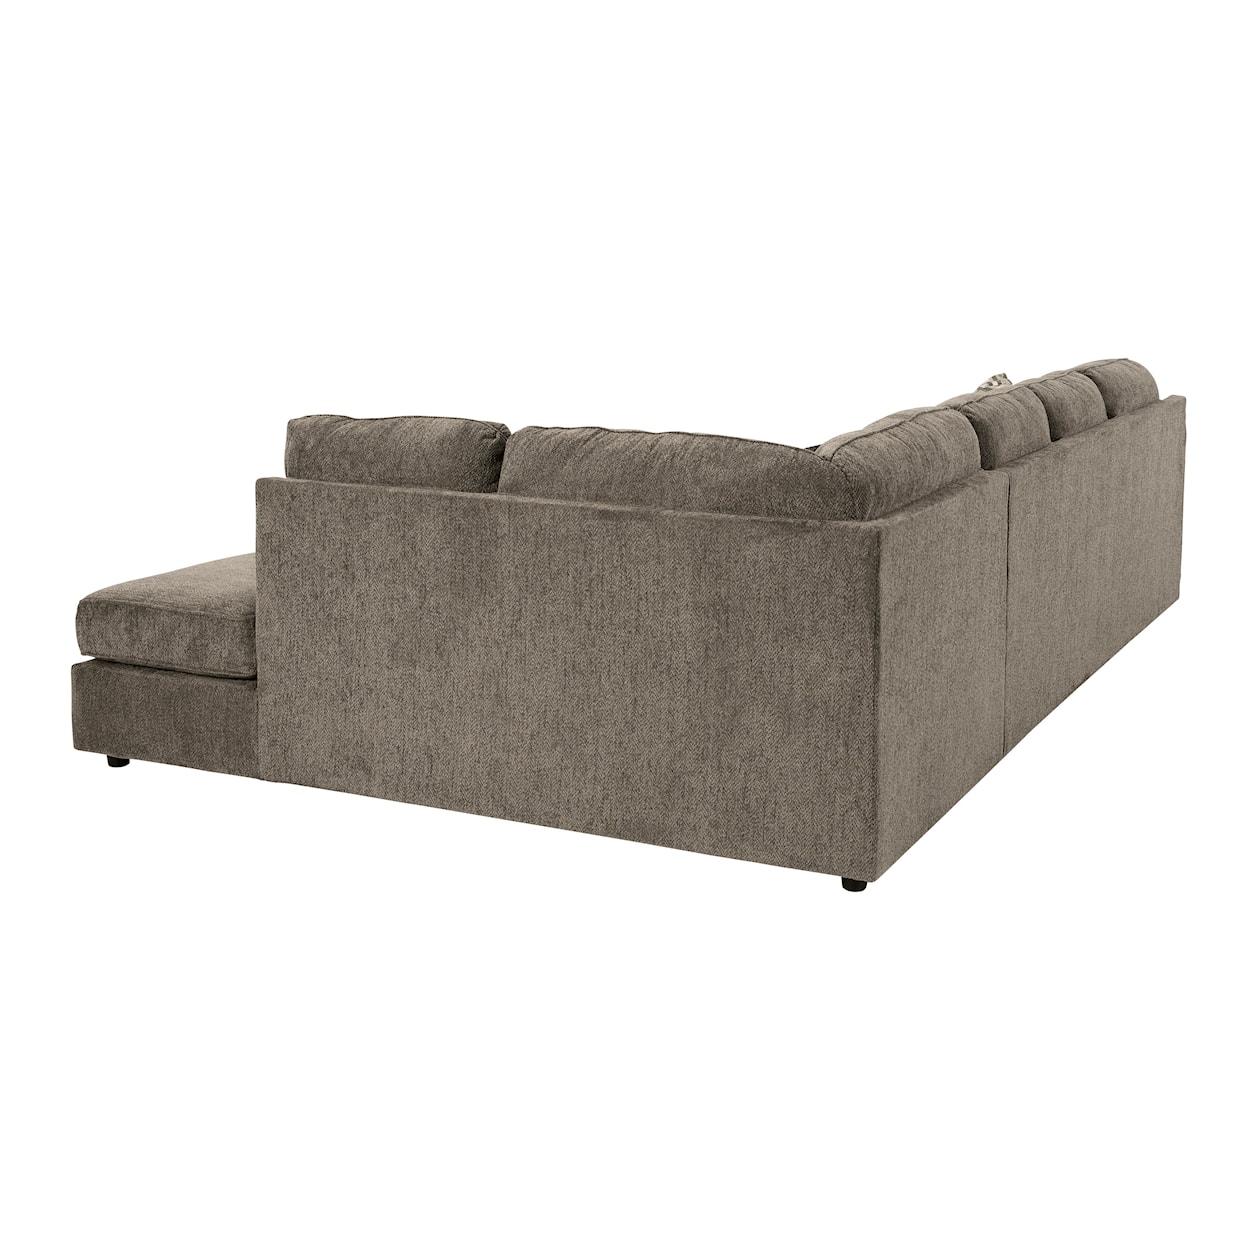 Ashley Signature Design O'Phannon 2-Piece Sectional with Chaise